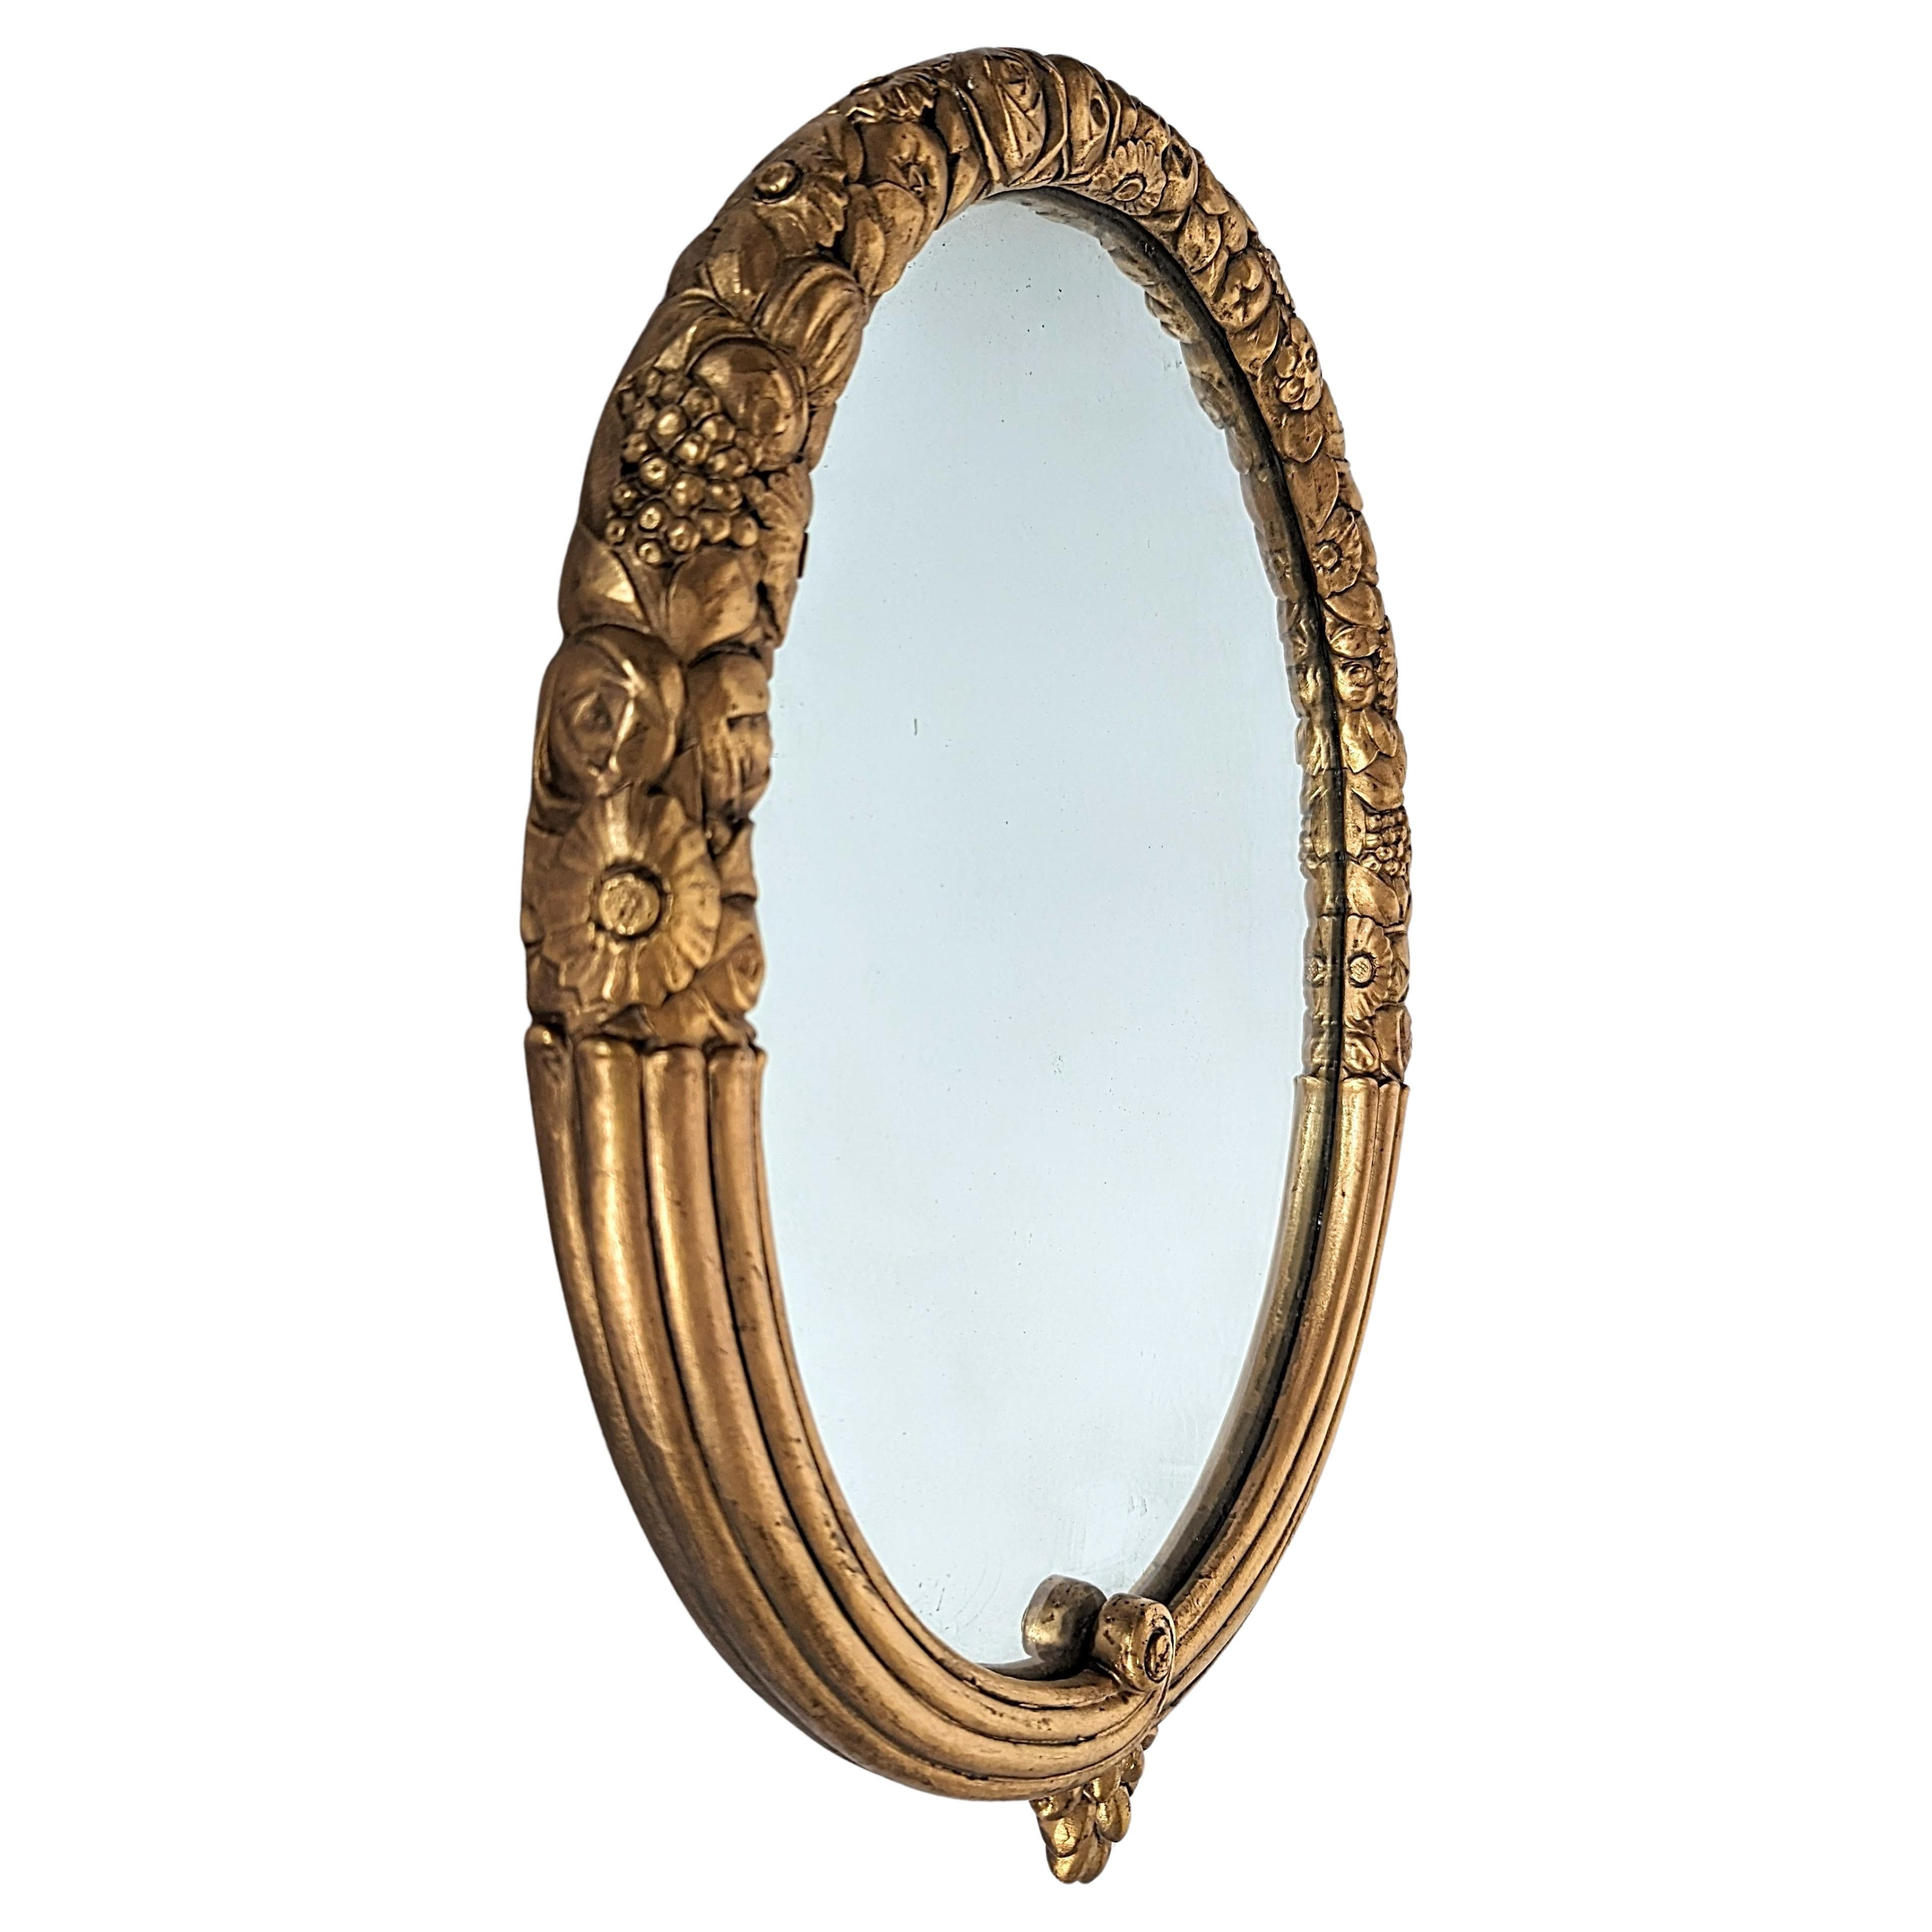 By LOUIS SUE AND ANDRE MARE. 
This rare Art Deco oval mirror made by Sue and Mare (Louis Sue, 1875-1968, and Andre Mare, 1887-1932) has a frame of hand-carved gilt wood. The upper section has a floral carving with Golden gilding that extends with